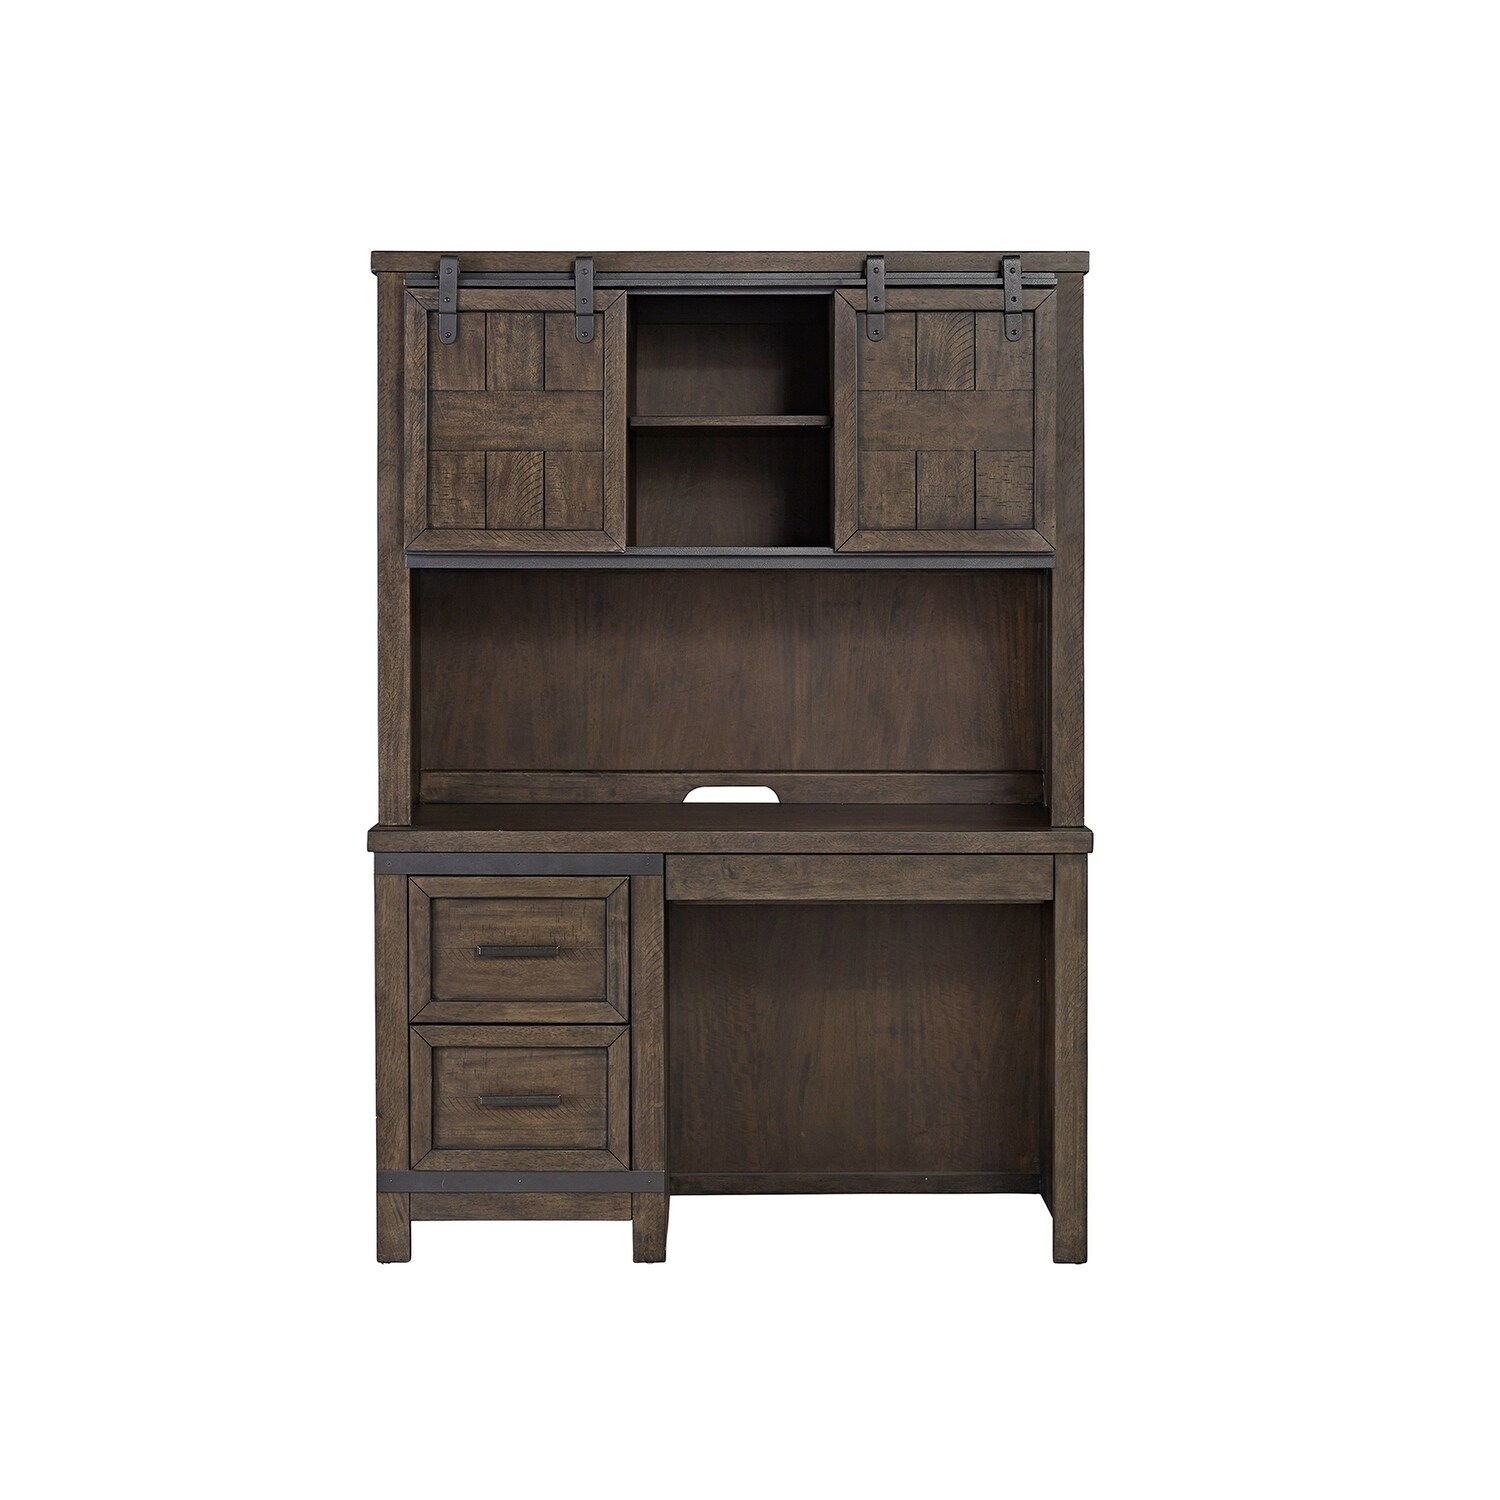 Shop Thornwood Hills Youth Rock Beaten Grey Student Desk And Hutch